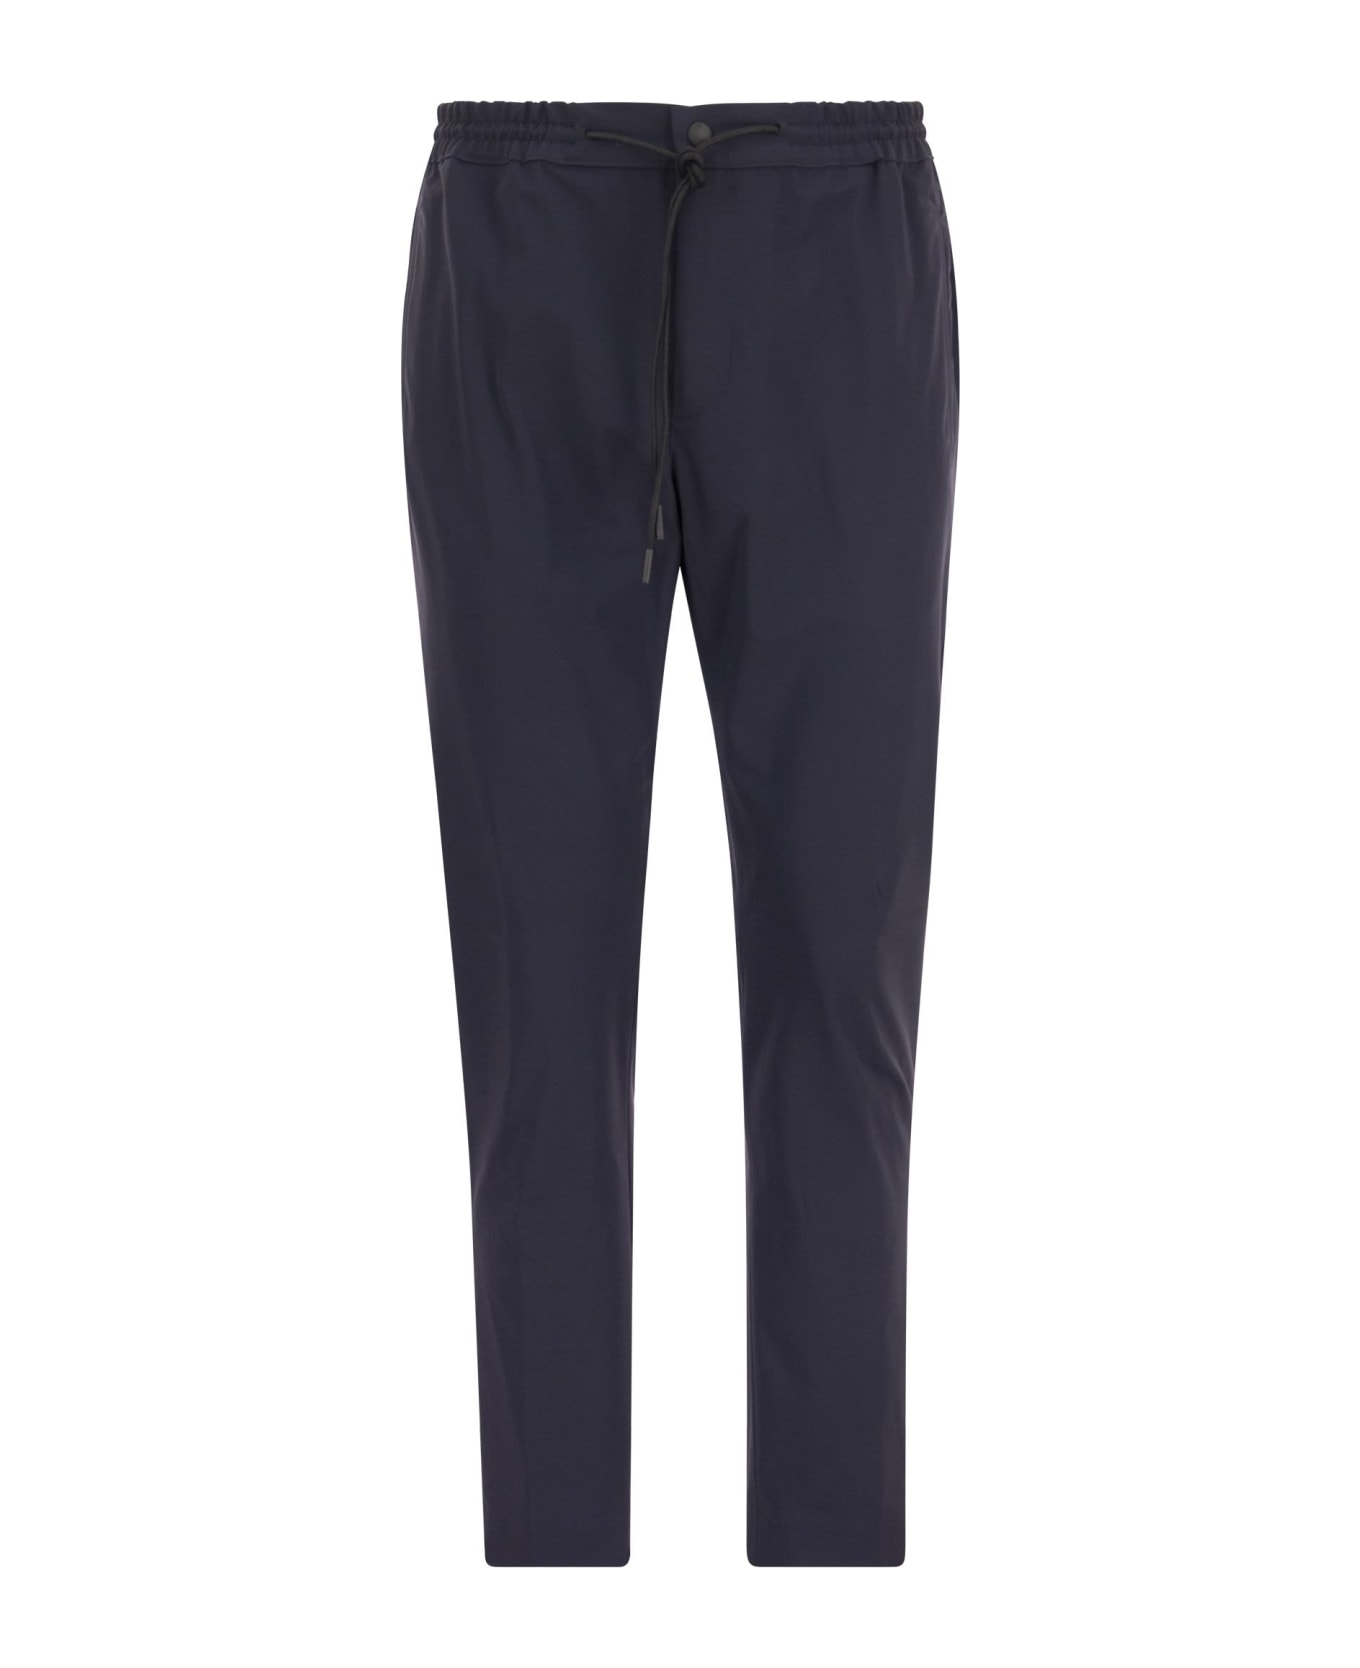 PT Torino 'omega' Trousers In Technical Fabric - Navy